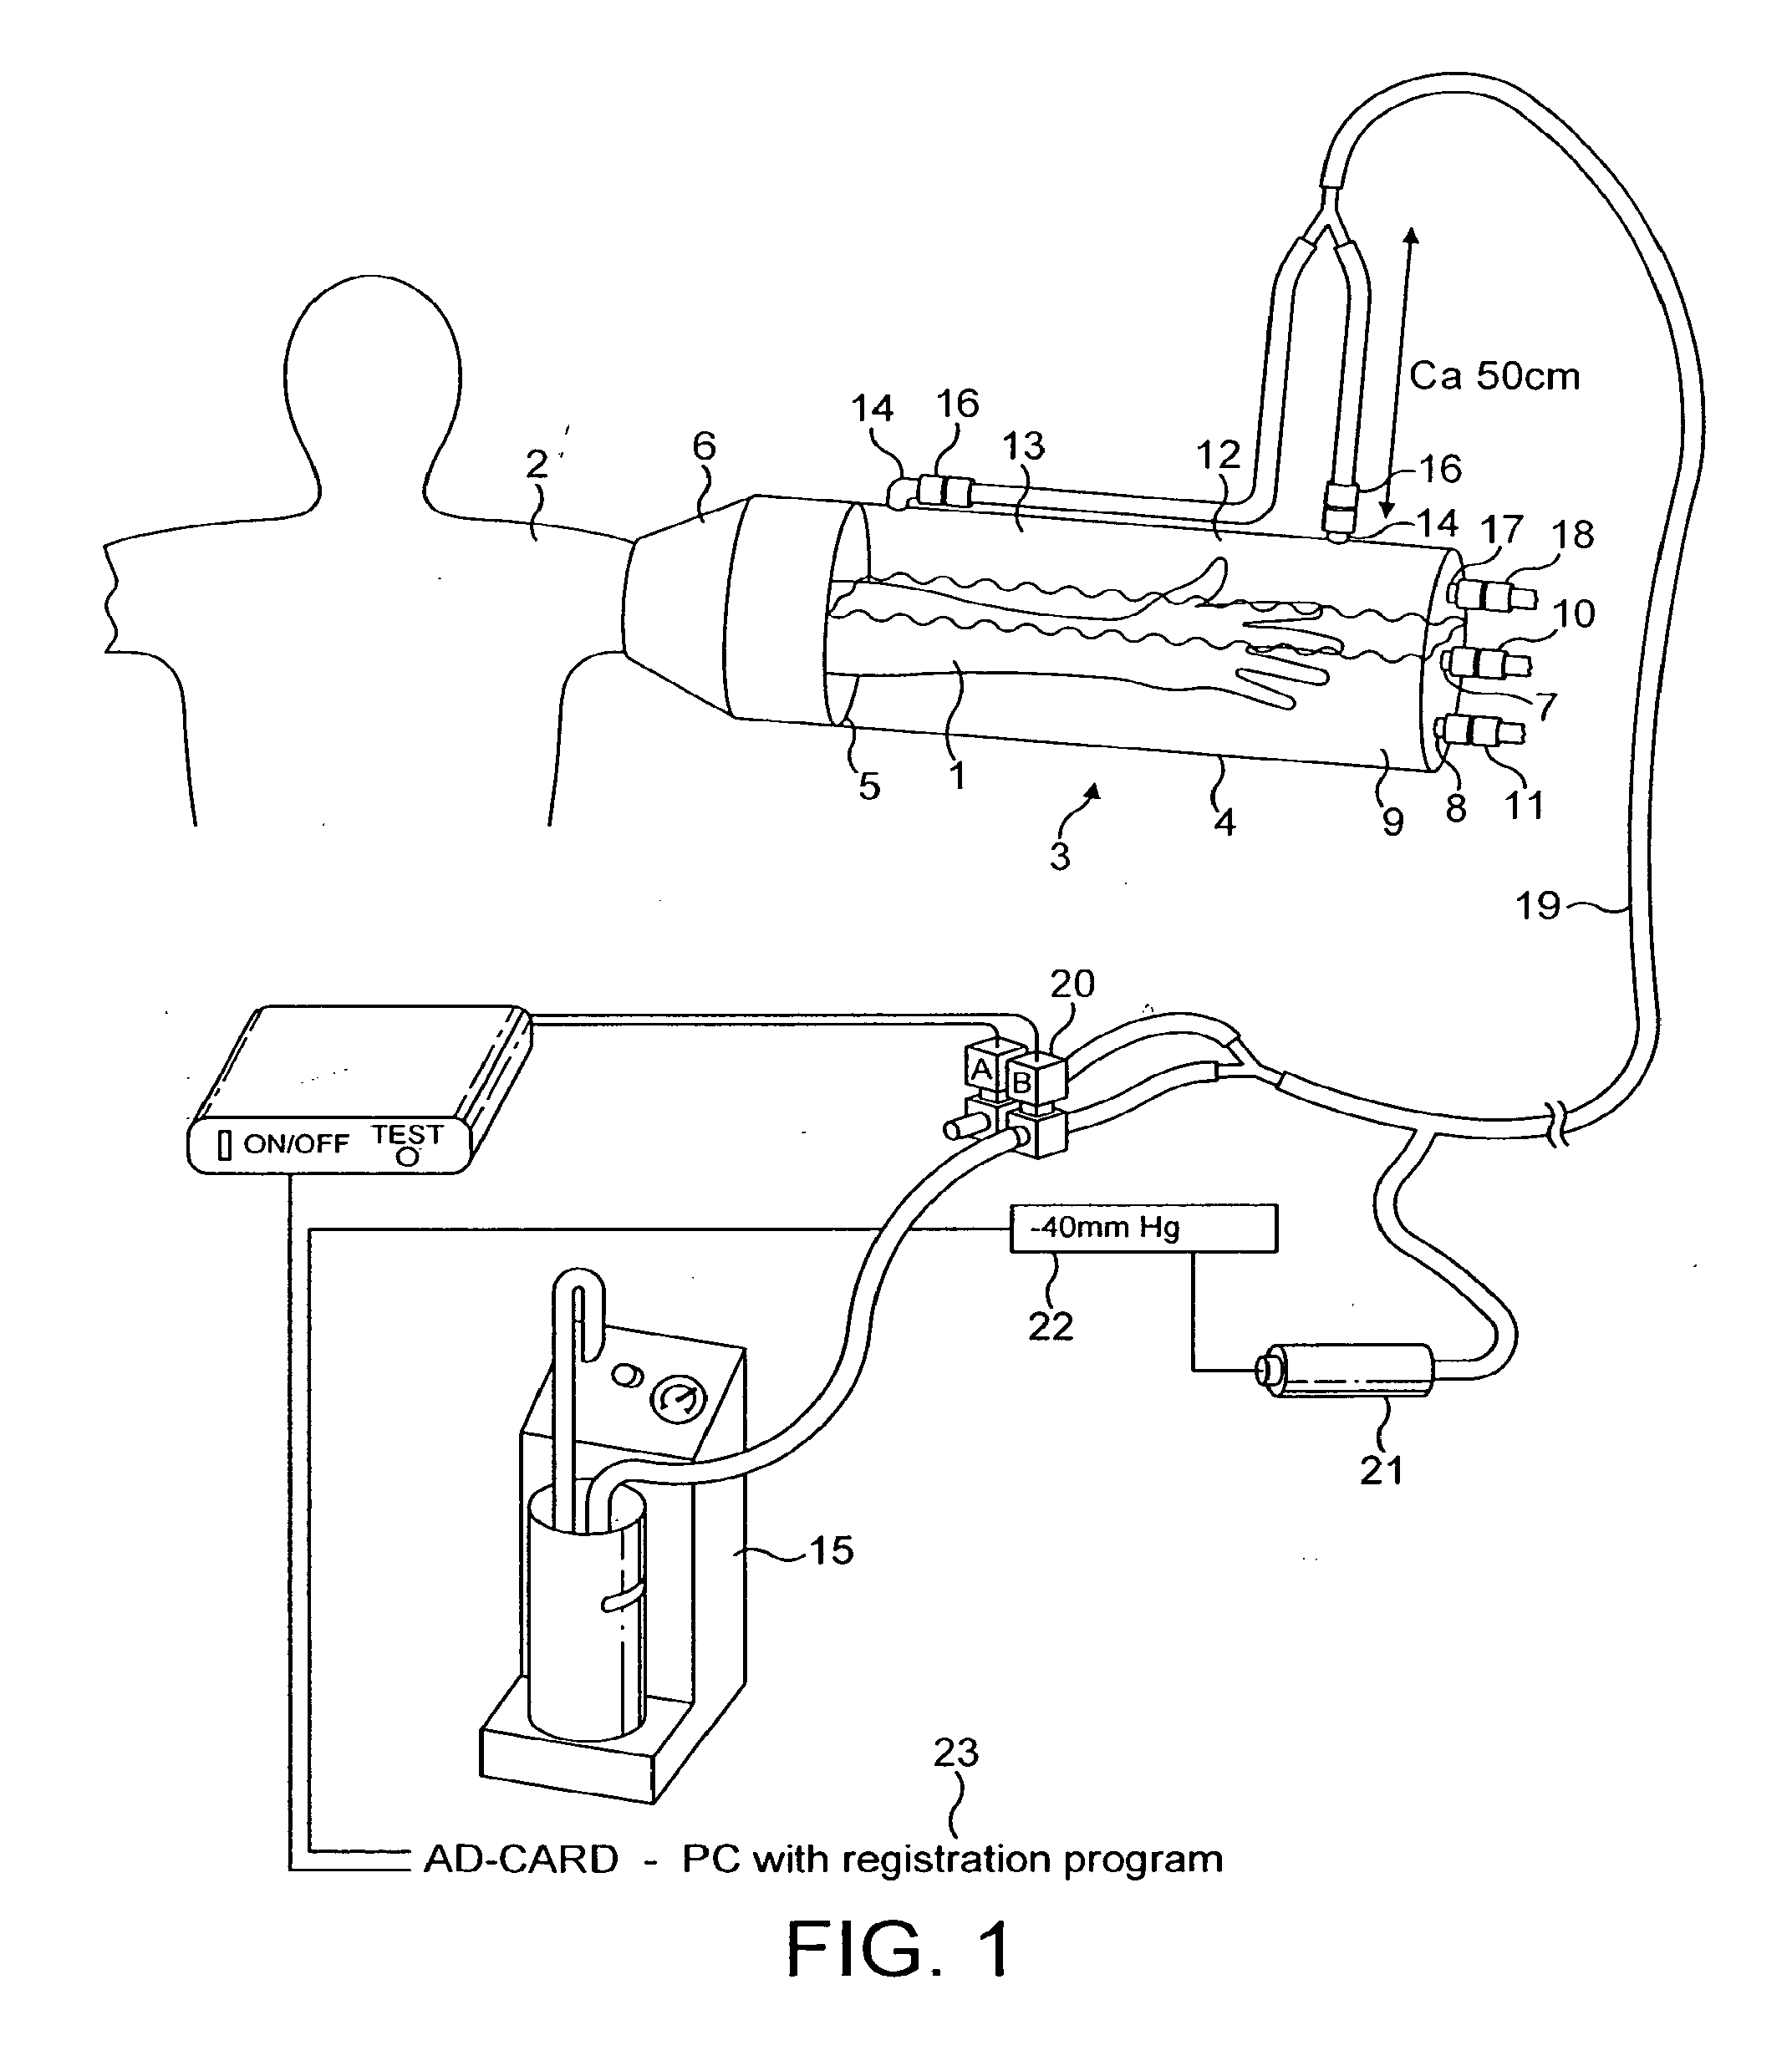 Device for applying a pulsating pressure to a local region of the body and the applications thereof